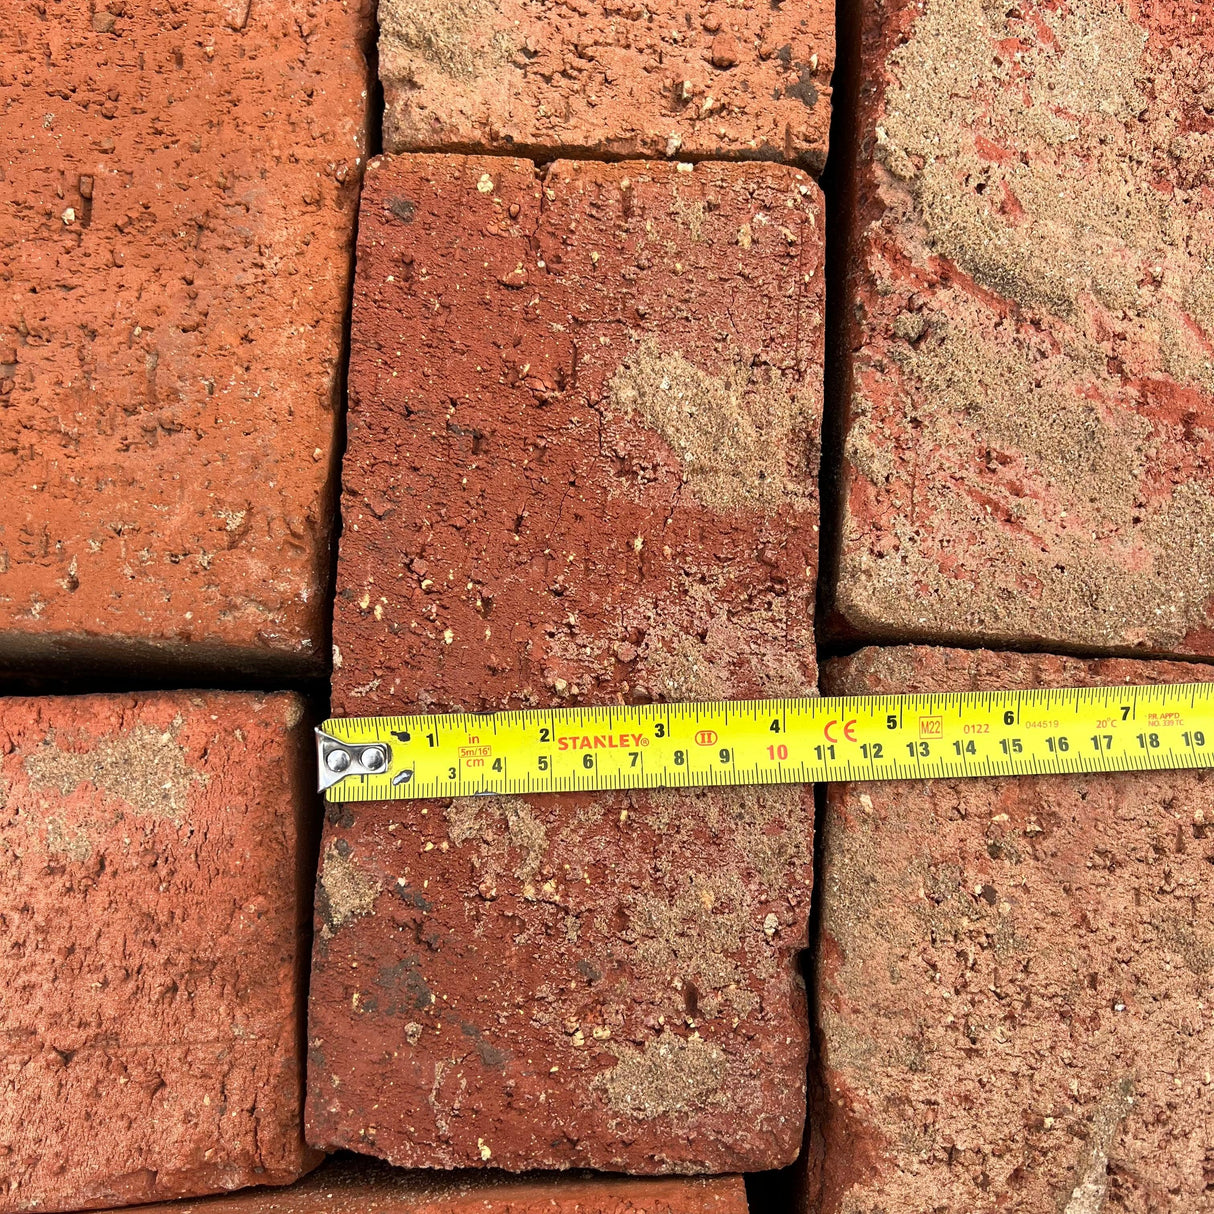 Reclaimed Orange Wirecut Bricks | Pack of 250 Brick | Free Delivery - Reclaimed Brick Company